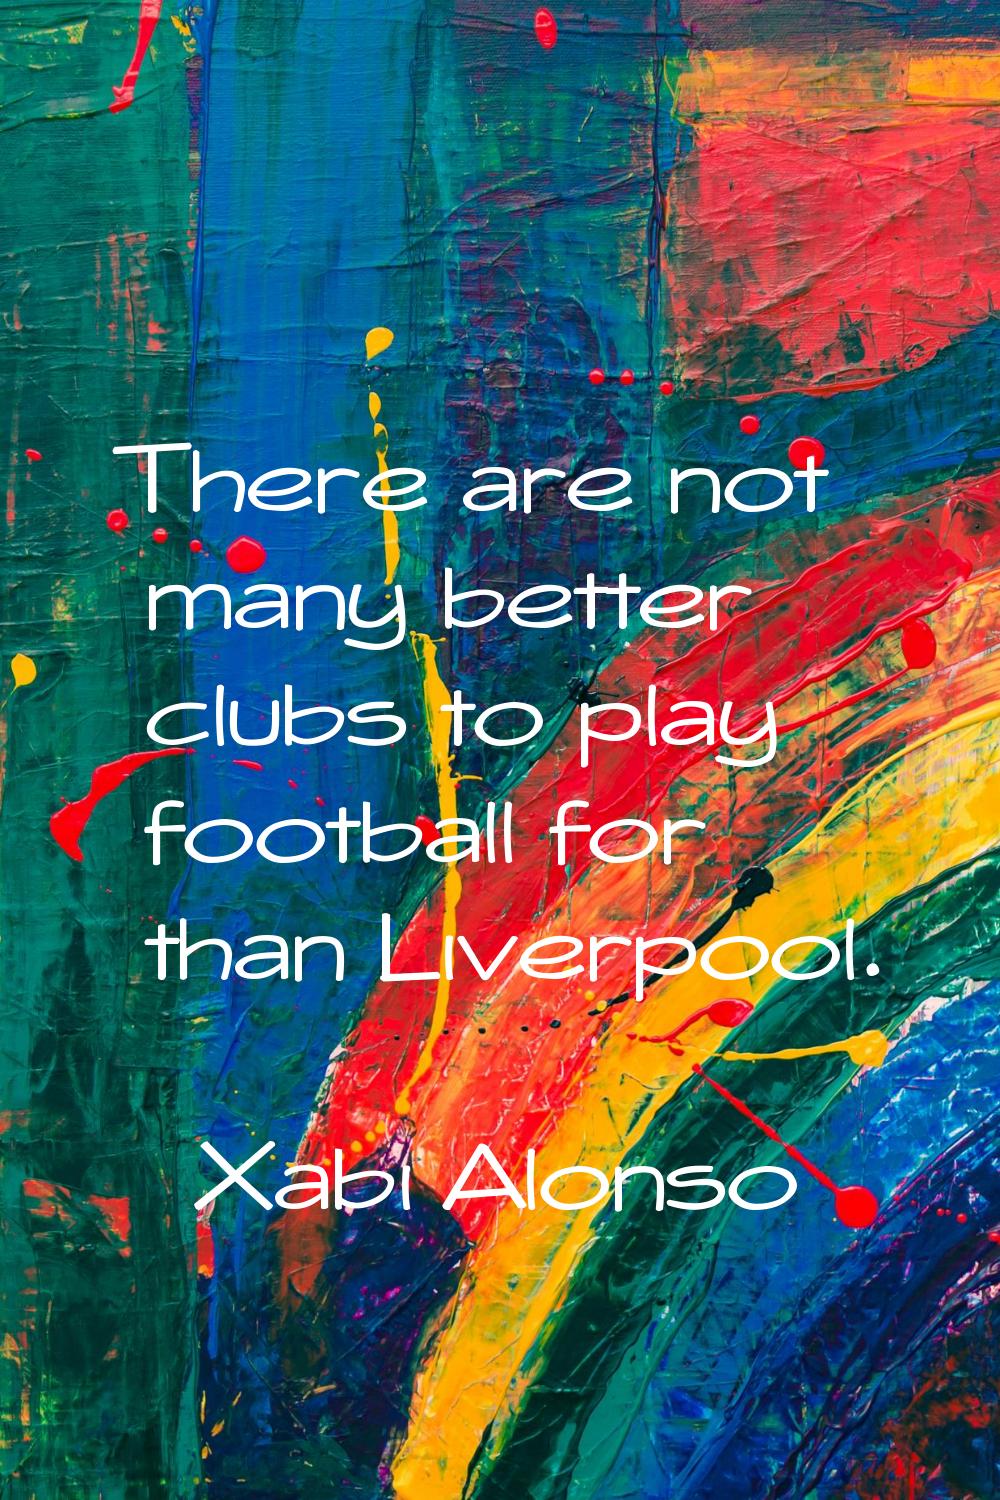 There are not many better clubs to play football for than Liverpool.